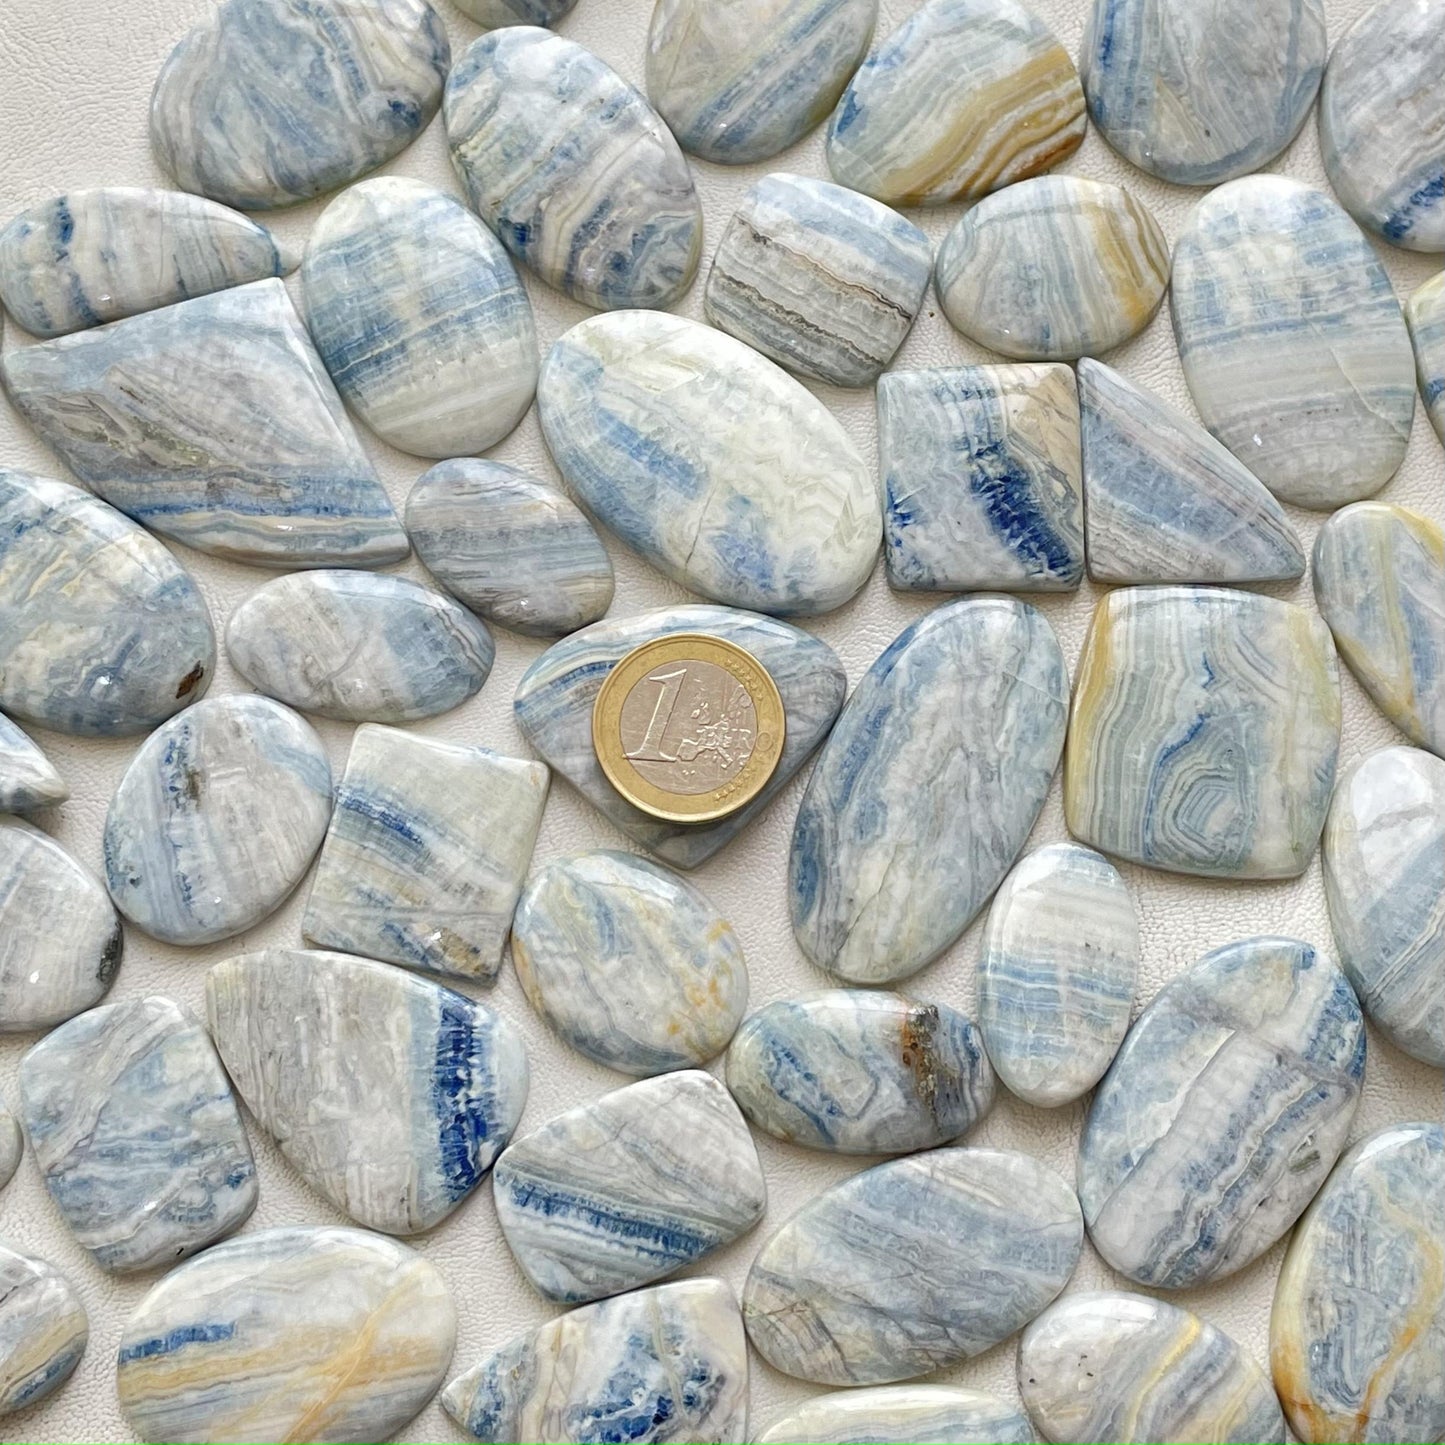 Natural Blue Rhodochrosite Cabochon Wholesale Lot By Weight With Different Shapes And Sizes Used For Jewelry Making (Natural)